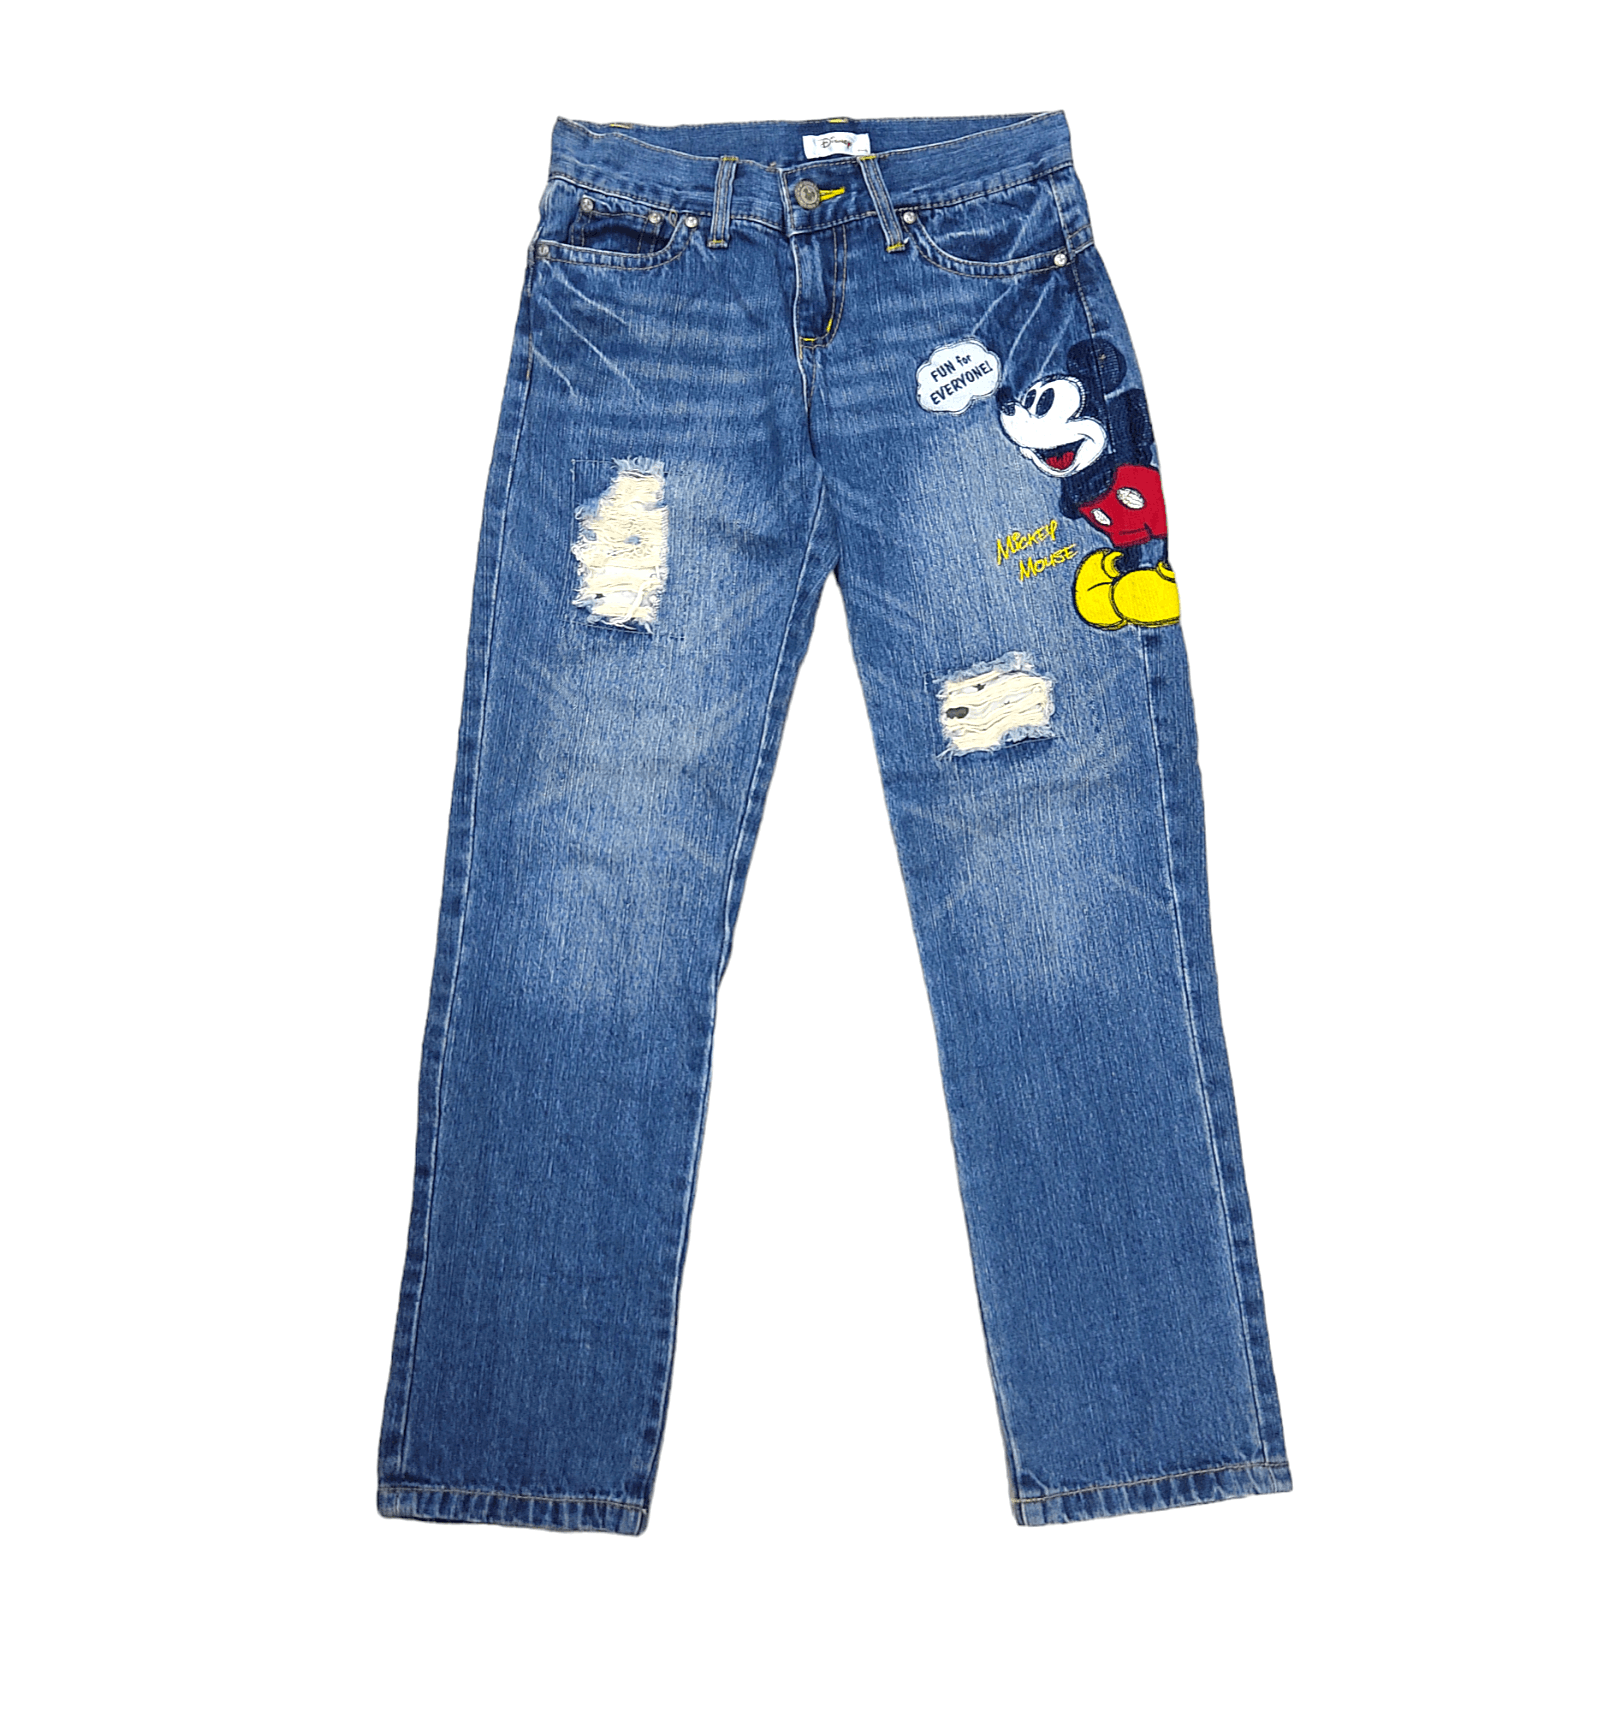 Disney MICKEY MOUSE Embroidered Distressed Denim Pants - 1